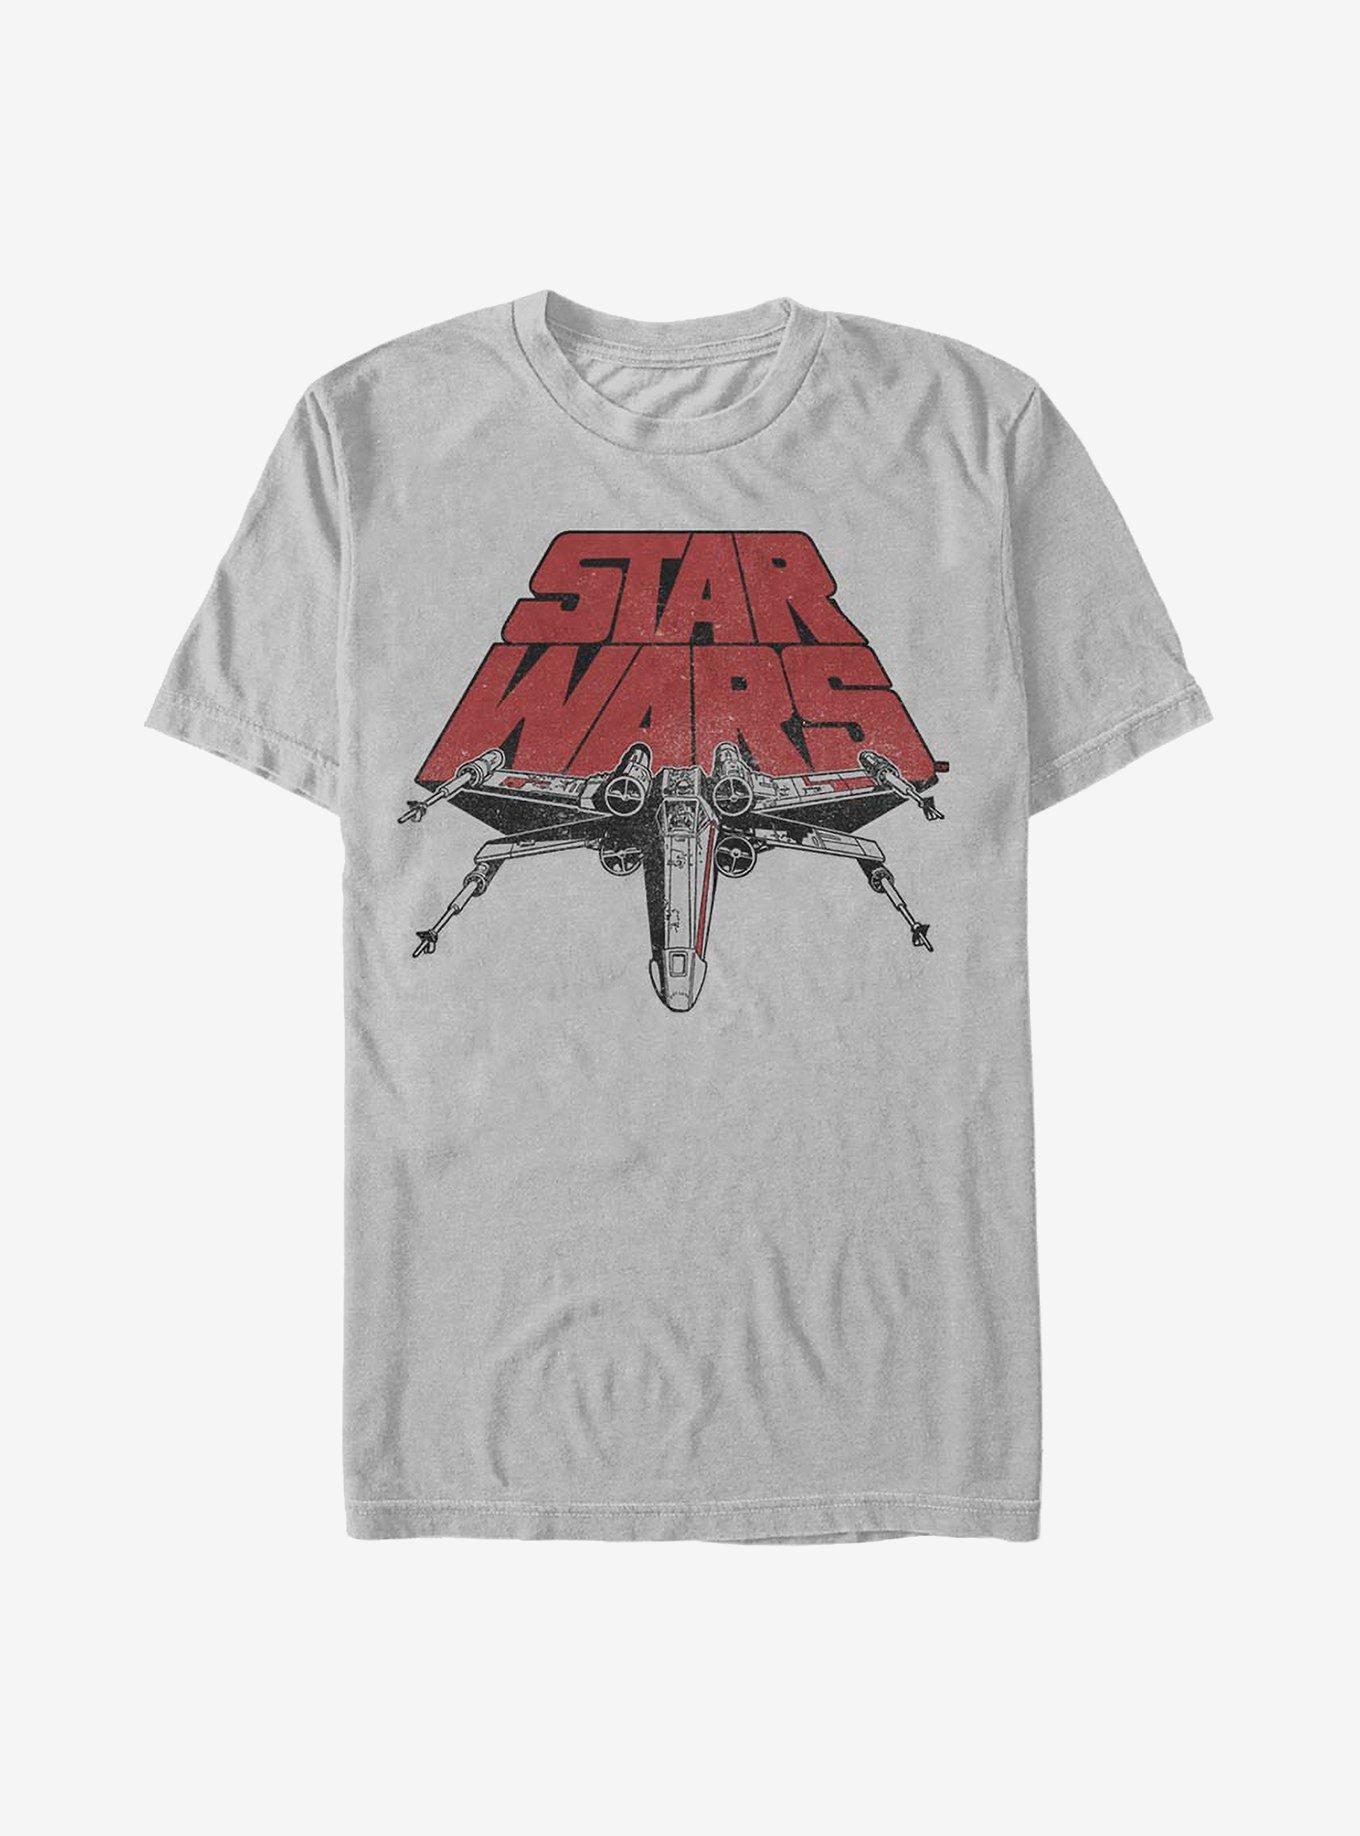 Star Wars X-Wing Title T-Shirt, WHITE, hi-res